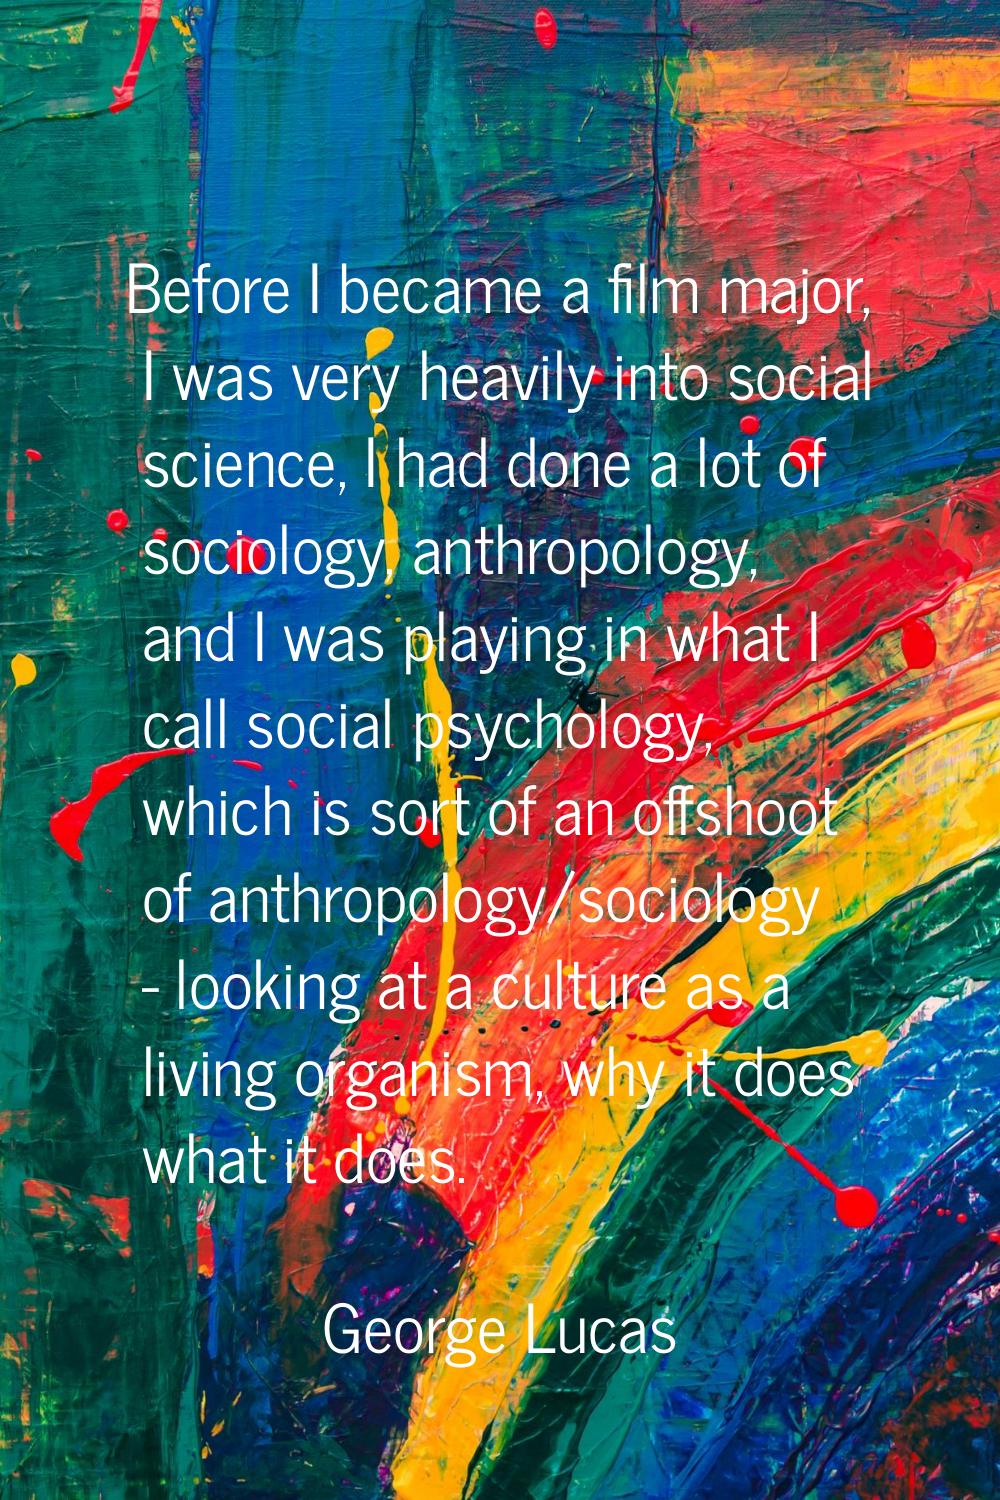 Before I became a film major, I was very heavily into social science, I had done a lot of sociology